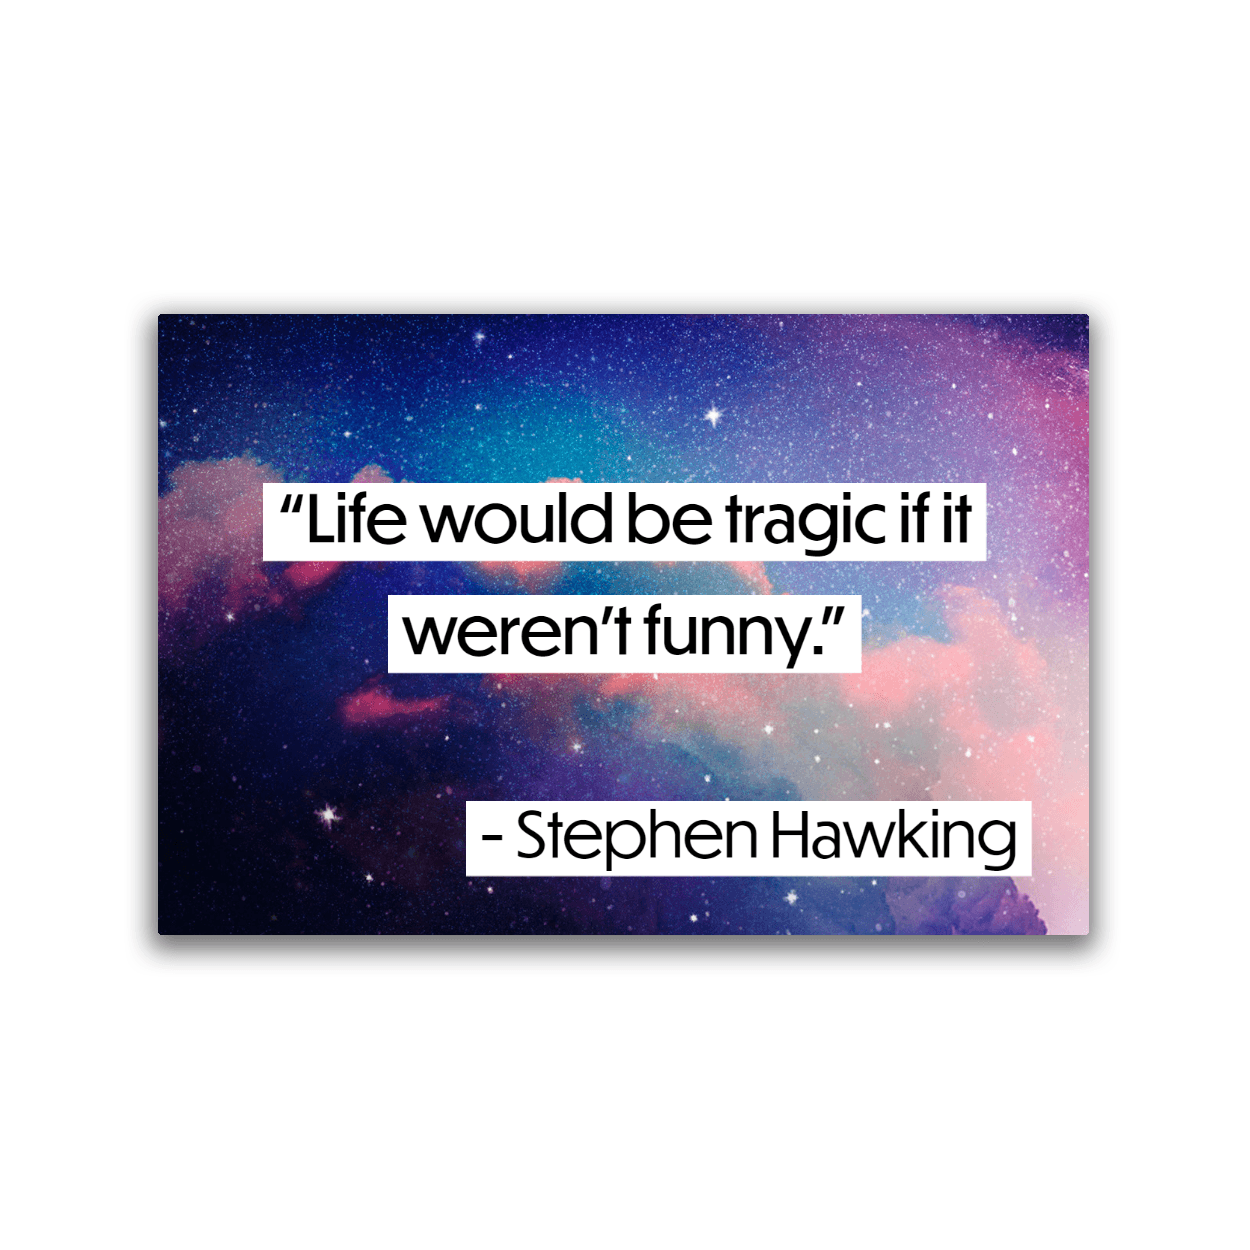 Image of a 2x3 magnet with a Stephen Hawking quote